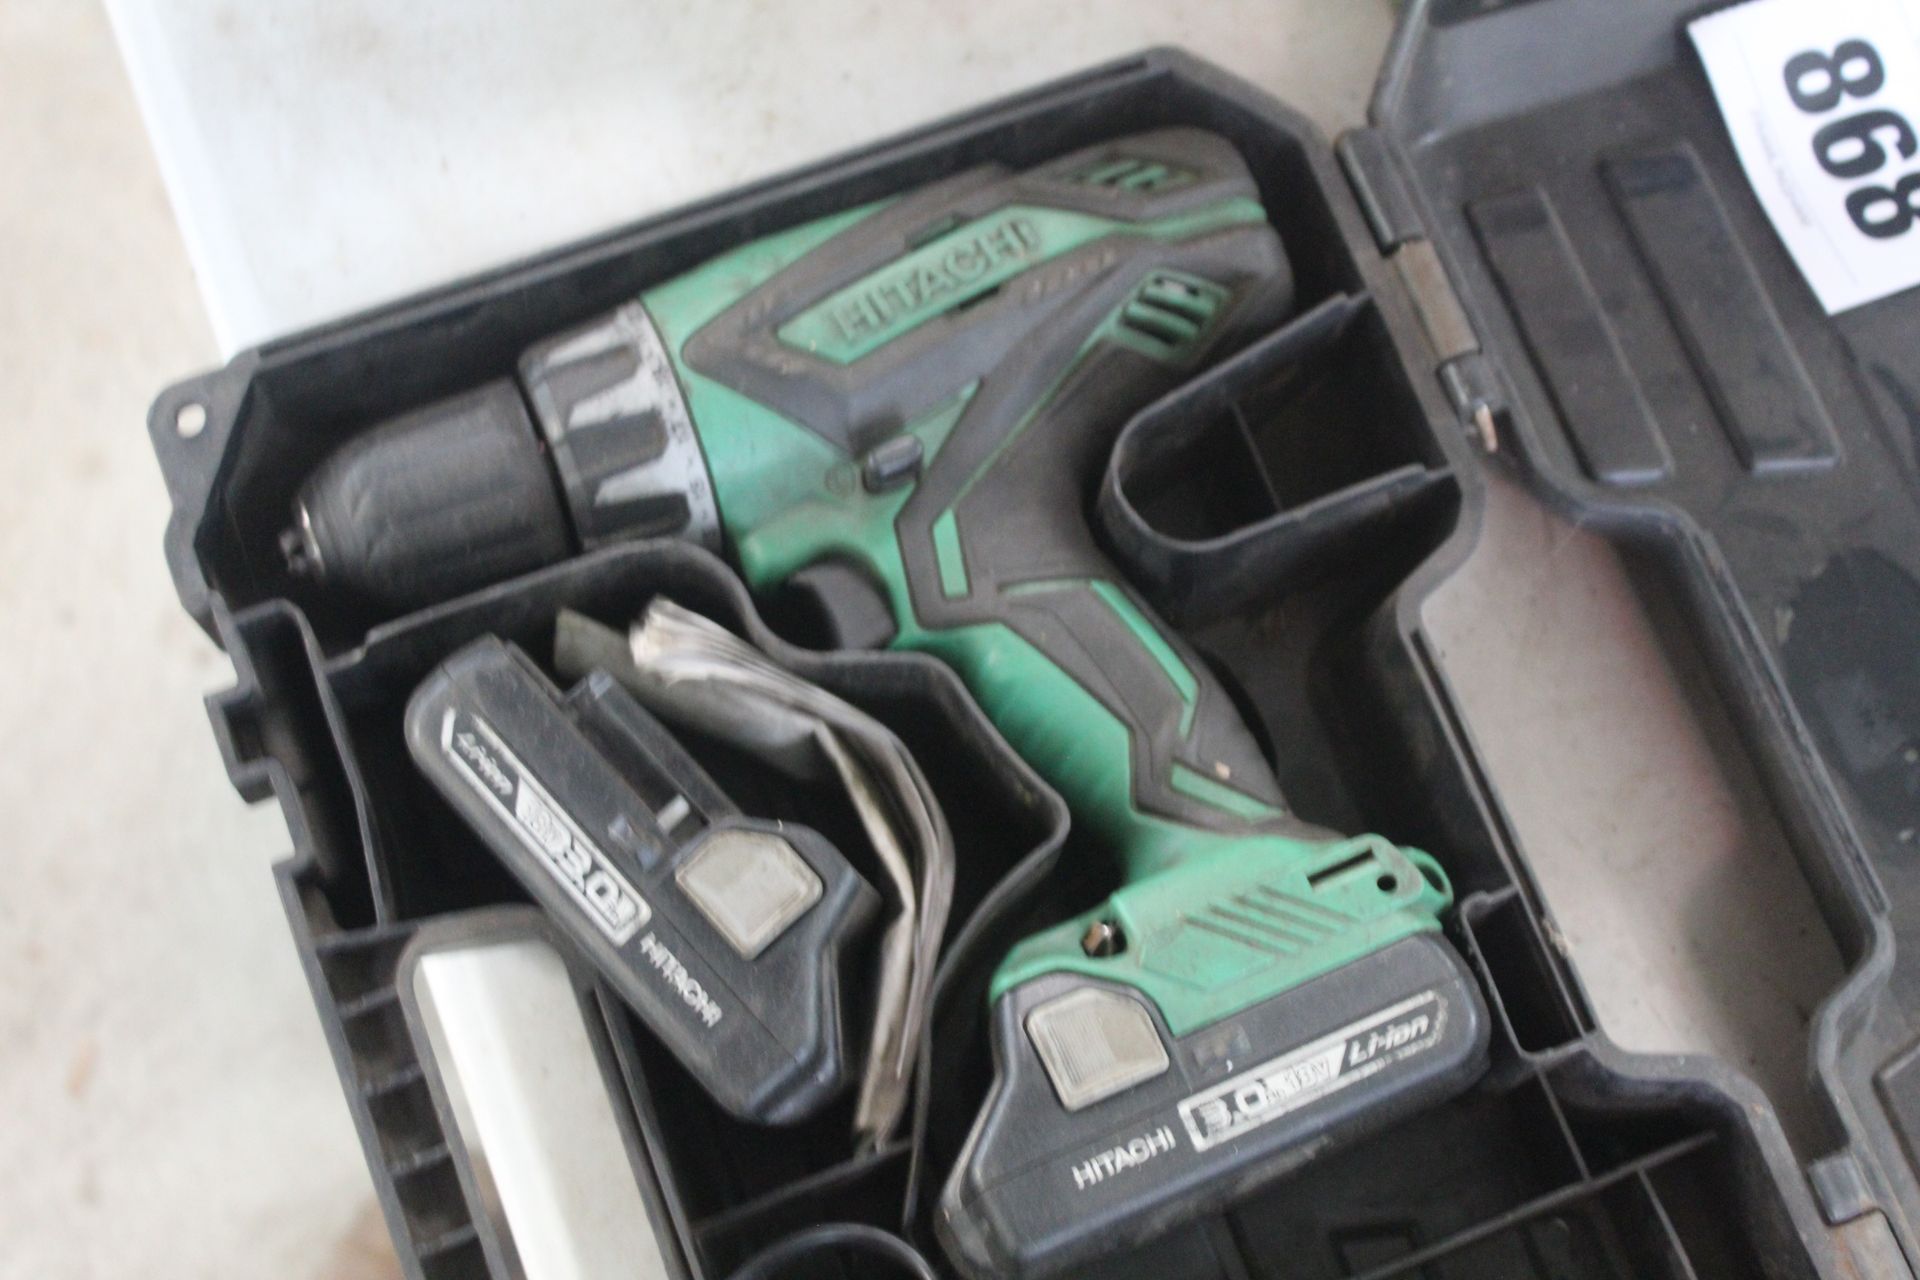 Hitachi 18v cordless drill, 2x batteries and charg - Image 2 of 4